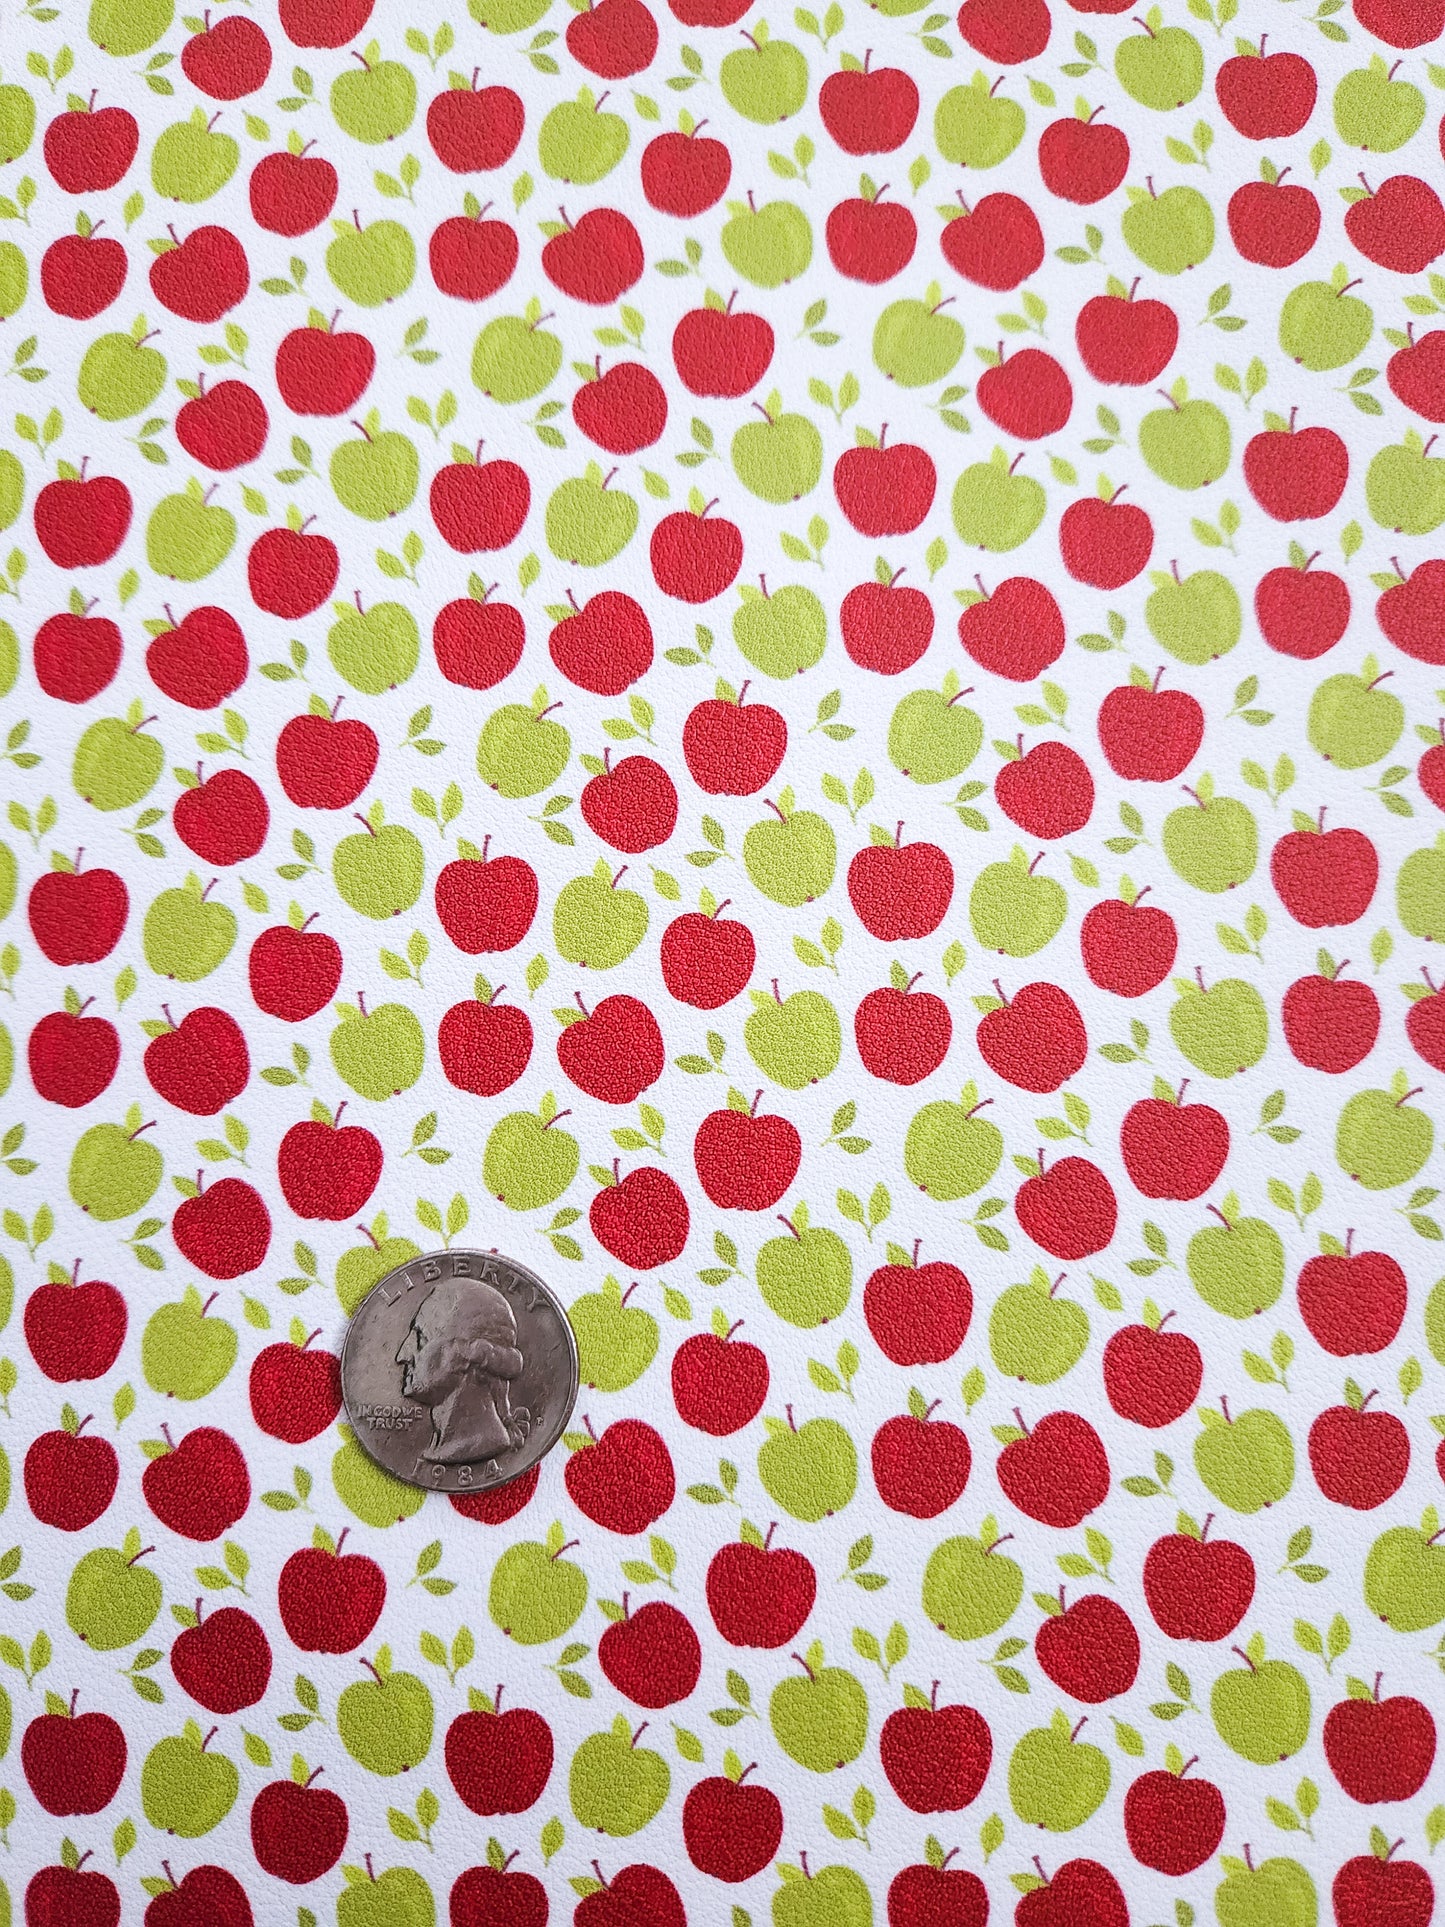 Red and Green Apples 9x12 faux leather sheet